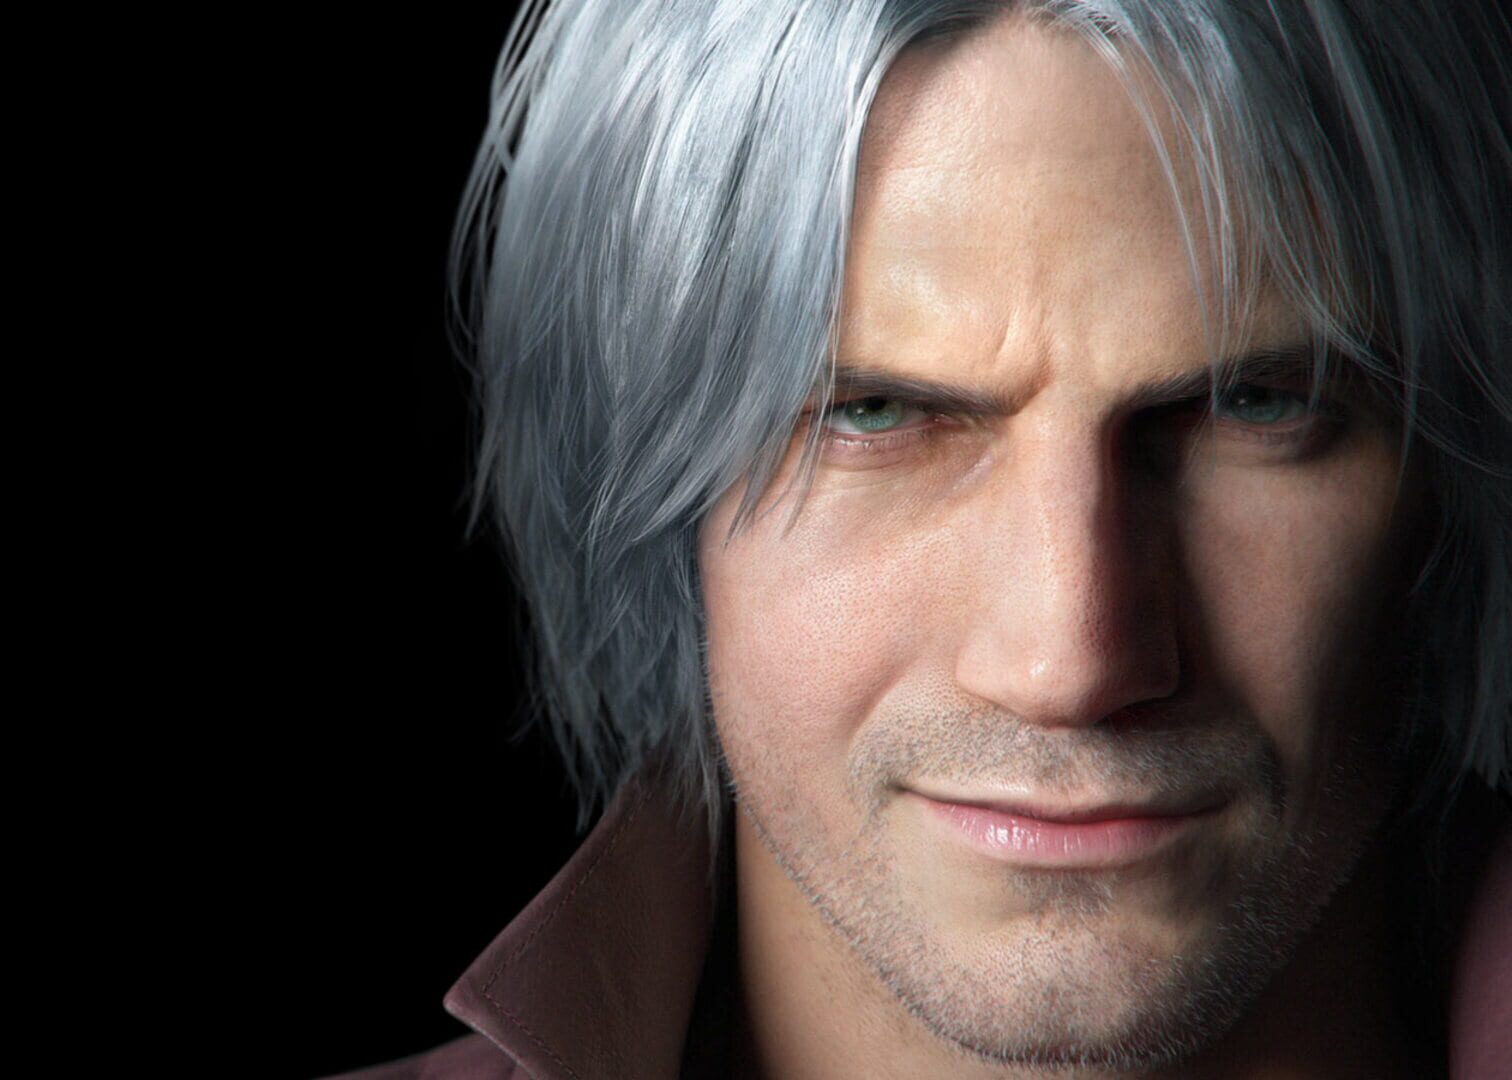 Arte - Devil May Cry 5